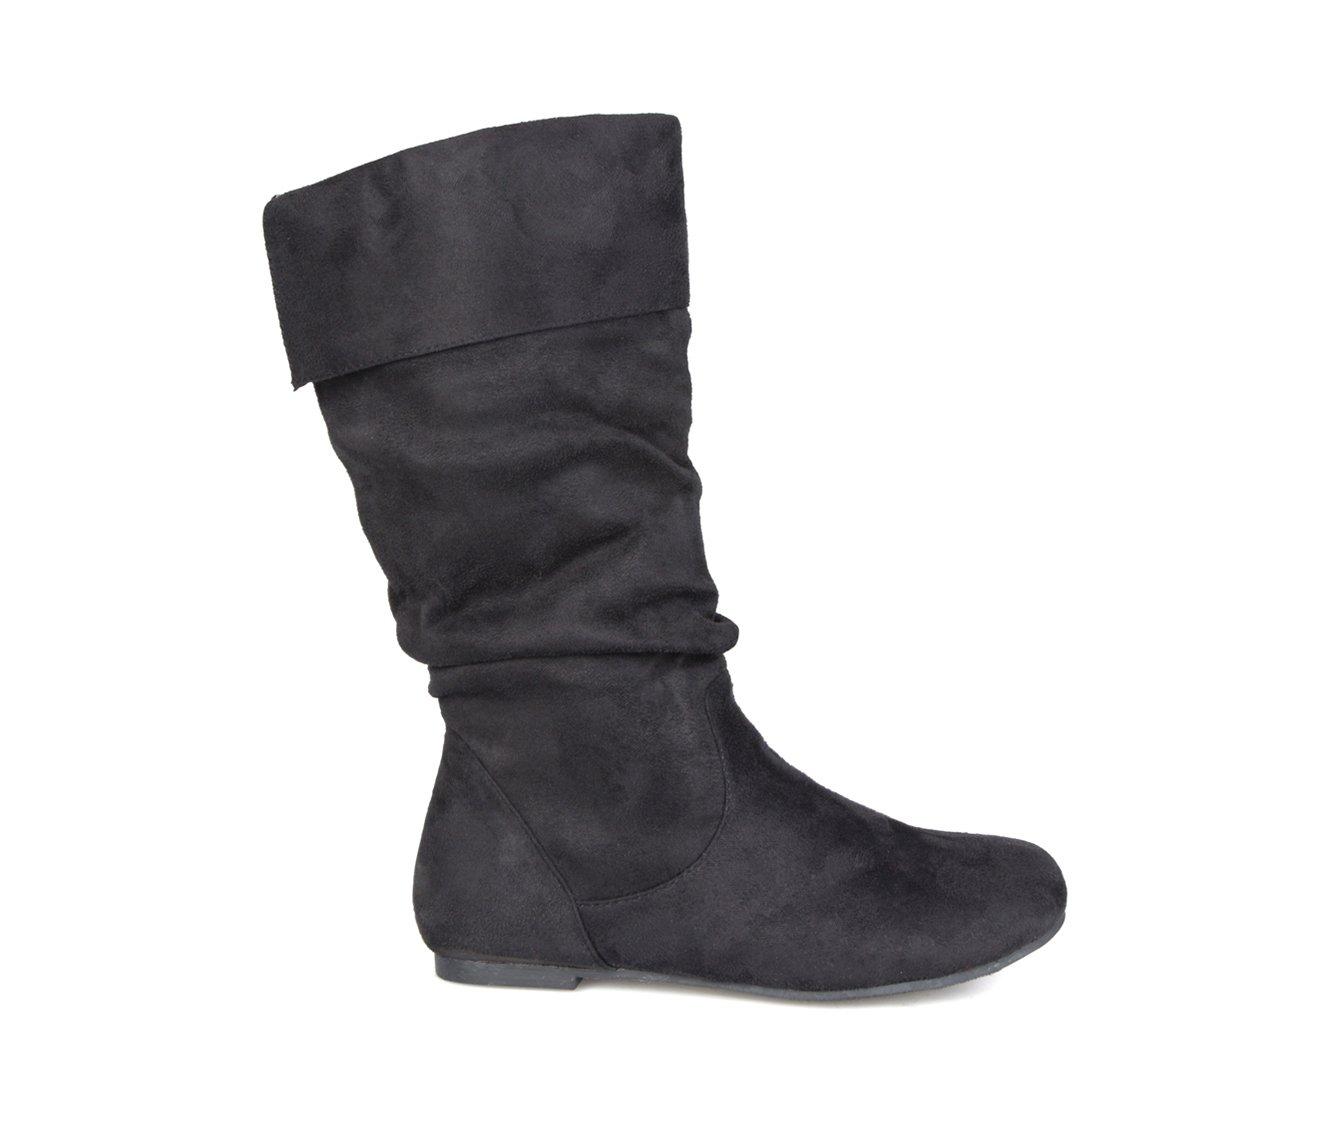 Women's Journee Collection Shelley-3 Mid Calf Boots